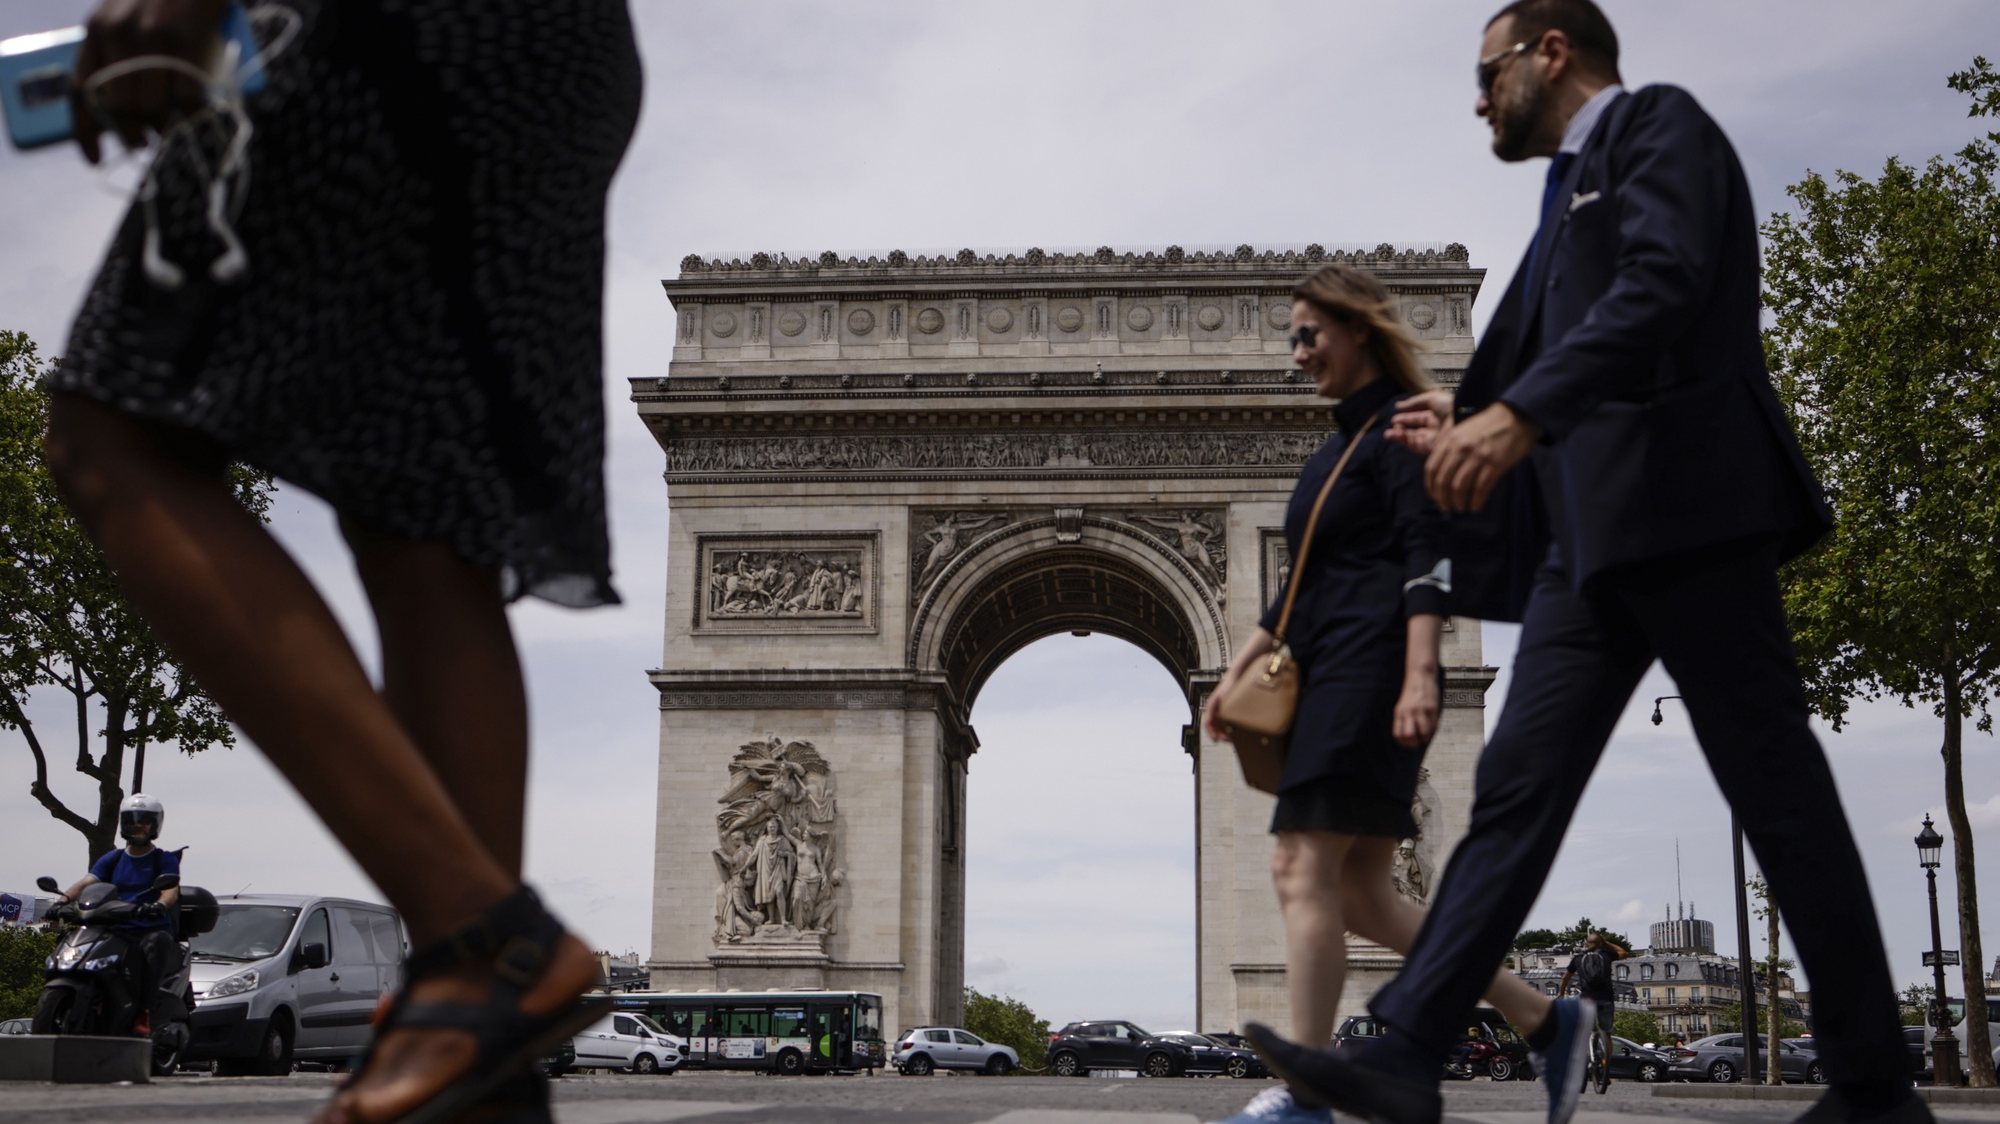 epa09279479 People not wearing protective face masks walk past the Arc of Triomphe in Paris, France, 17 June 2021. France eases some of its coronavirus disease (COVID-19) restrictions starting on 17 June, allowing not to wear a face mask in the streets.  EPA/YOAN VALAT